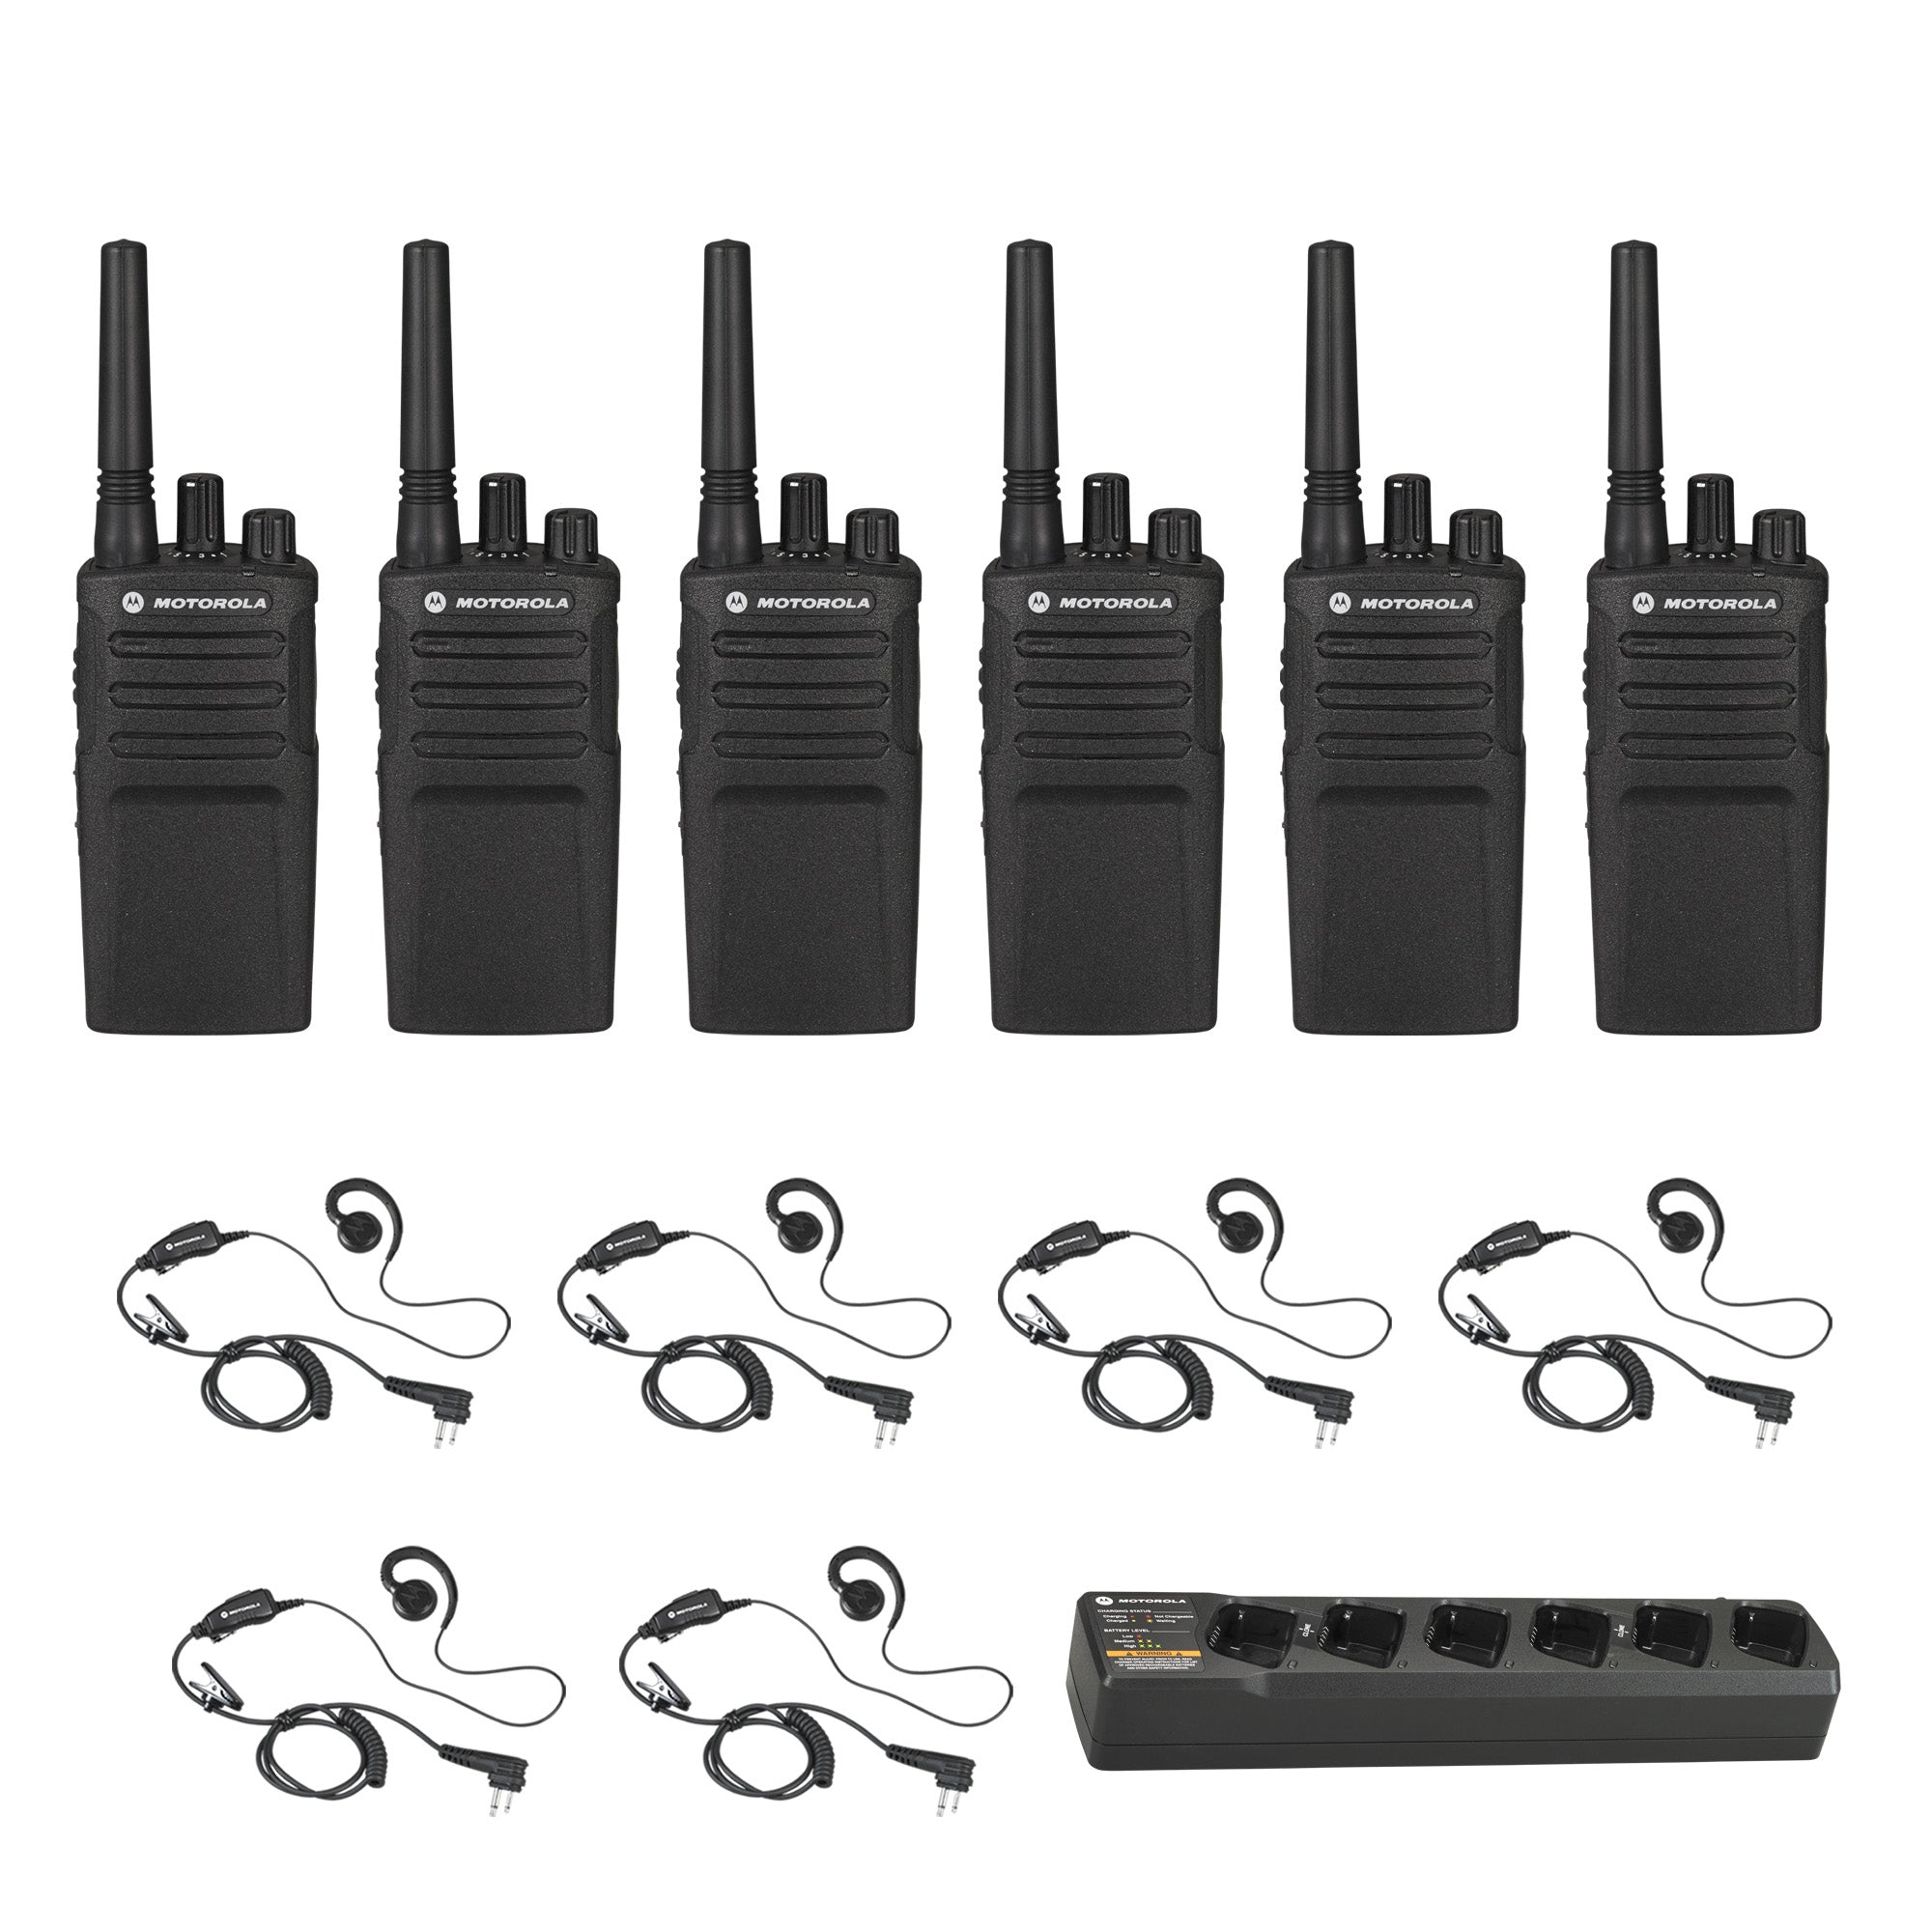 Motorola RMU2080 pack with Multi Unit Charger and Headsets|  TwoWayRadioGear